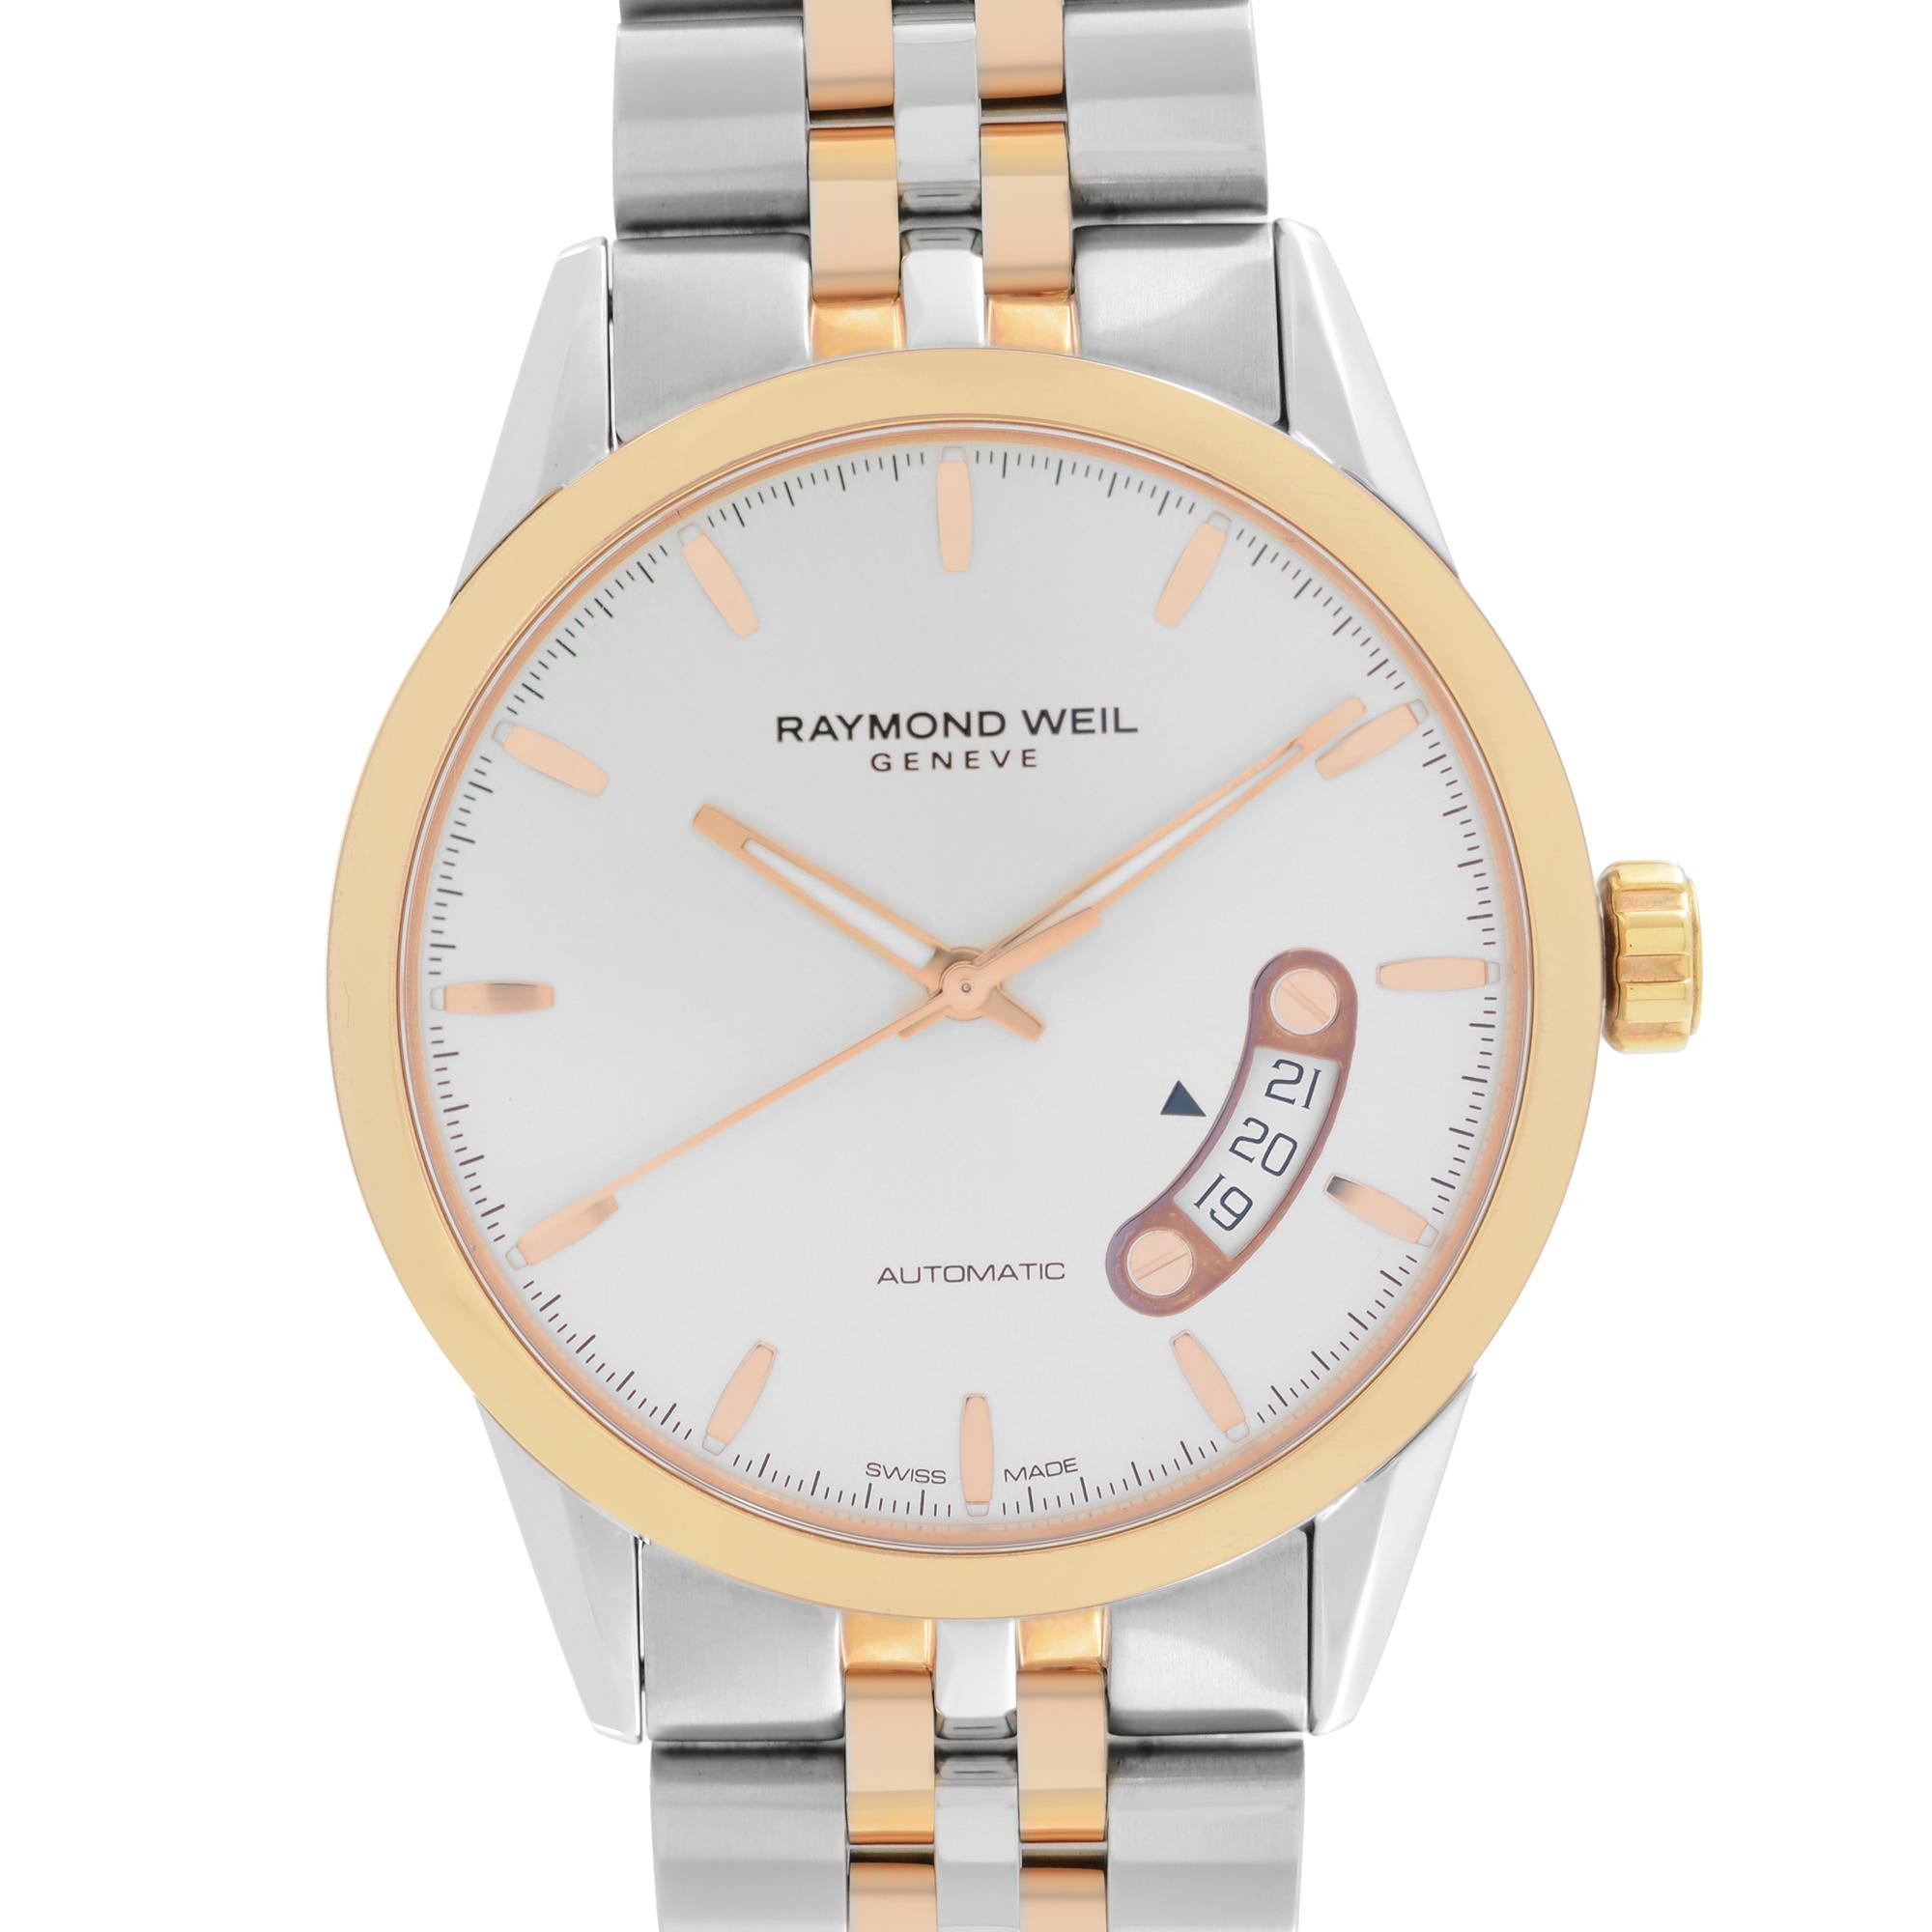 Store Display Model. The Watch Might Have Insignificant Blemishes on Gold Tone Parts. Original Box and Papers are Included. Covered by a 2-year Chronostore Warranty. 

Details:
MSRP 1850
Brand RAYMOND WEIL
Department Men
Model Number